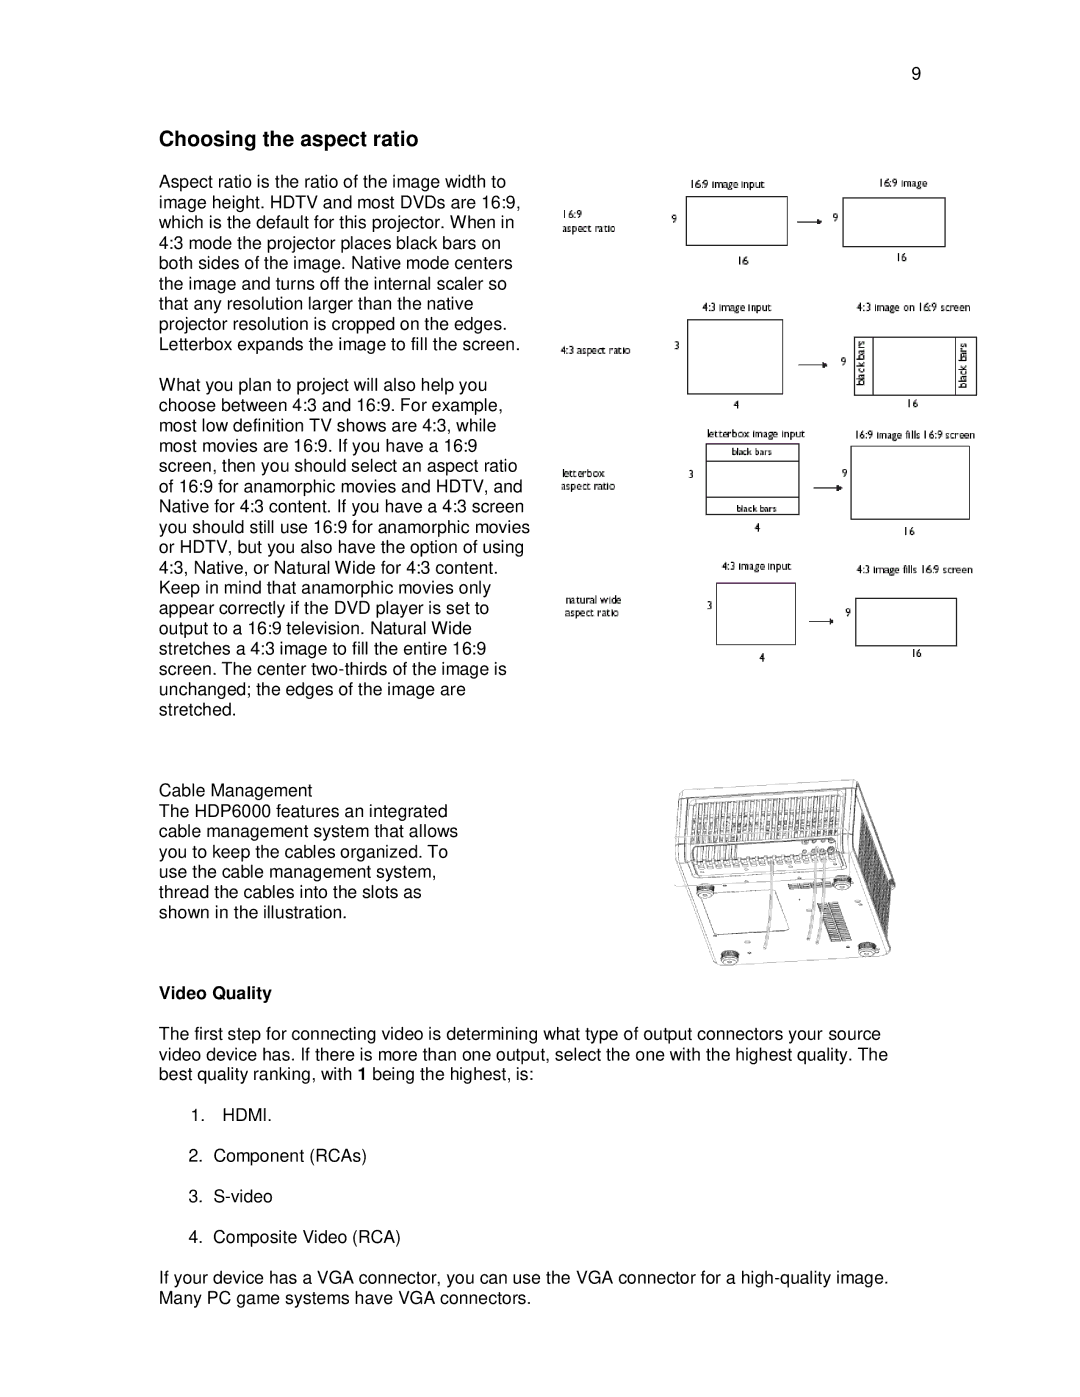 Knoll Systems HDP6000 user manual Choosing the aspect ratio, Video Quality 